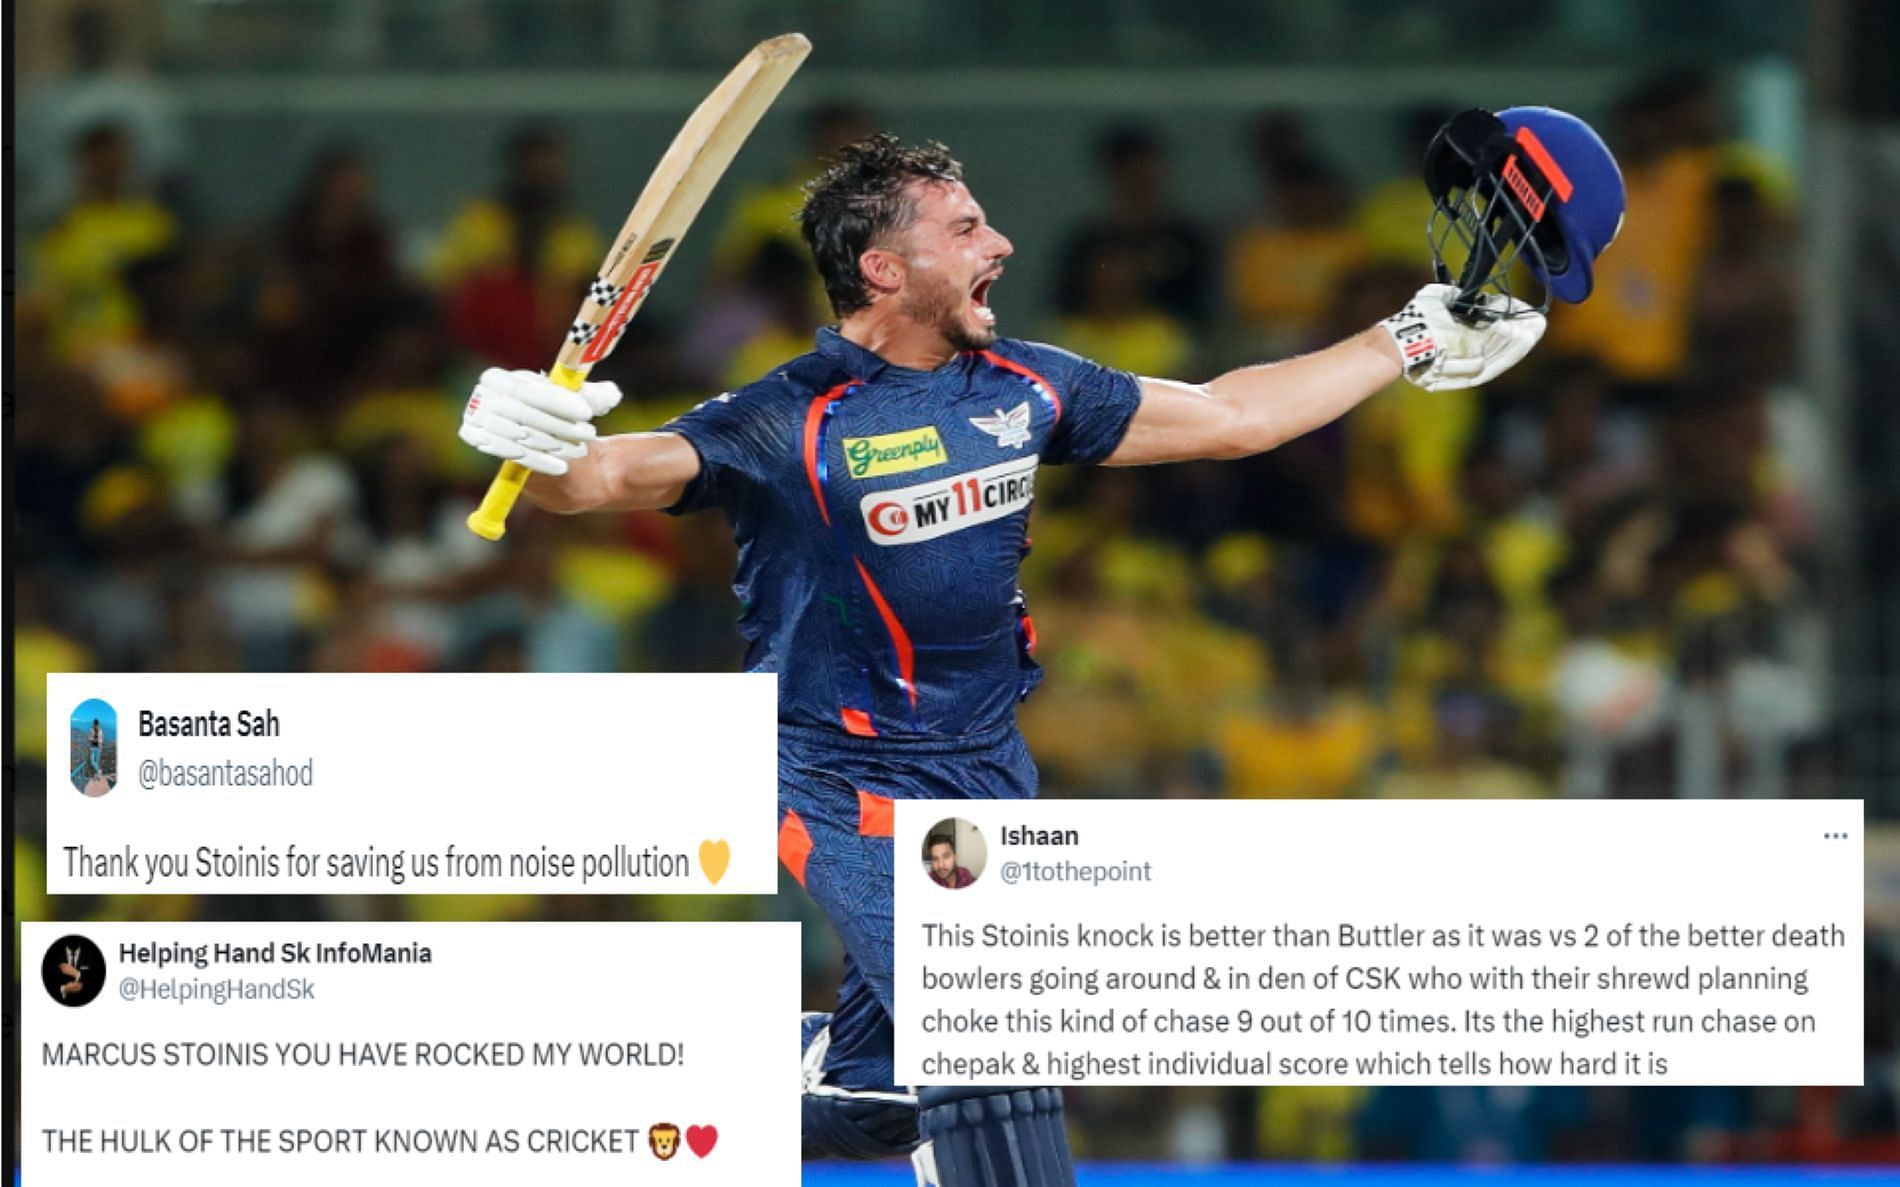 Stoinis pulled off one of the greatest IPL knocks in a run-chase [Credit: IPL twitter handle]